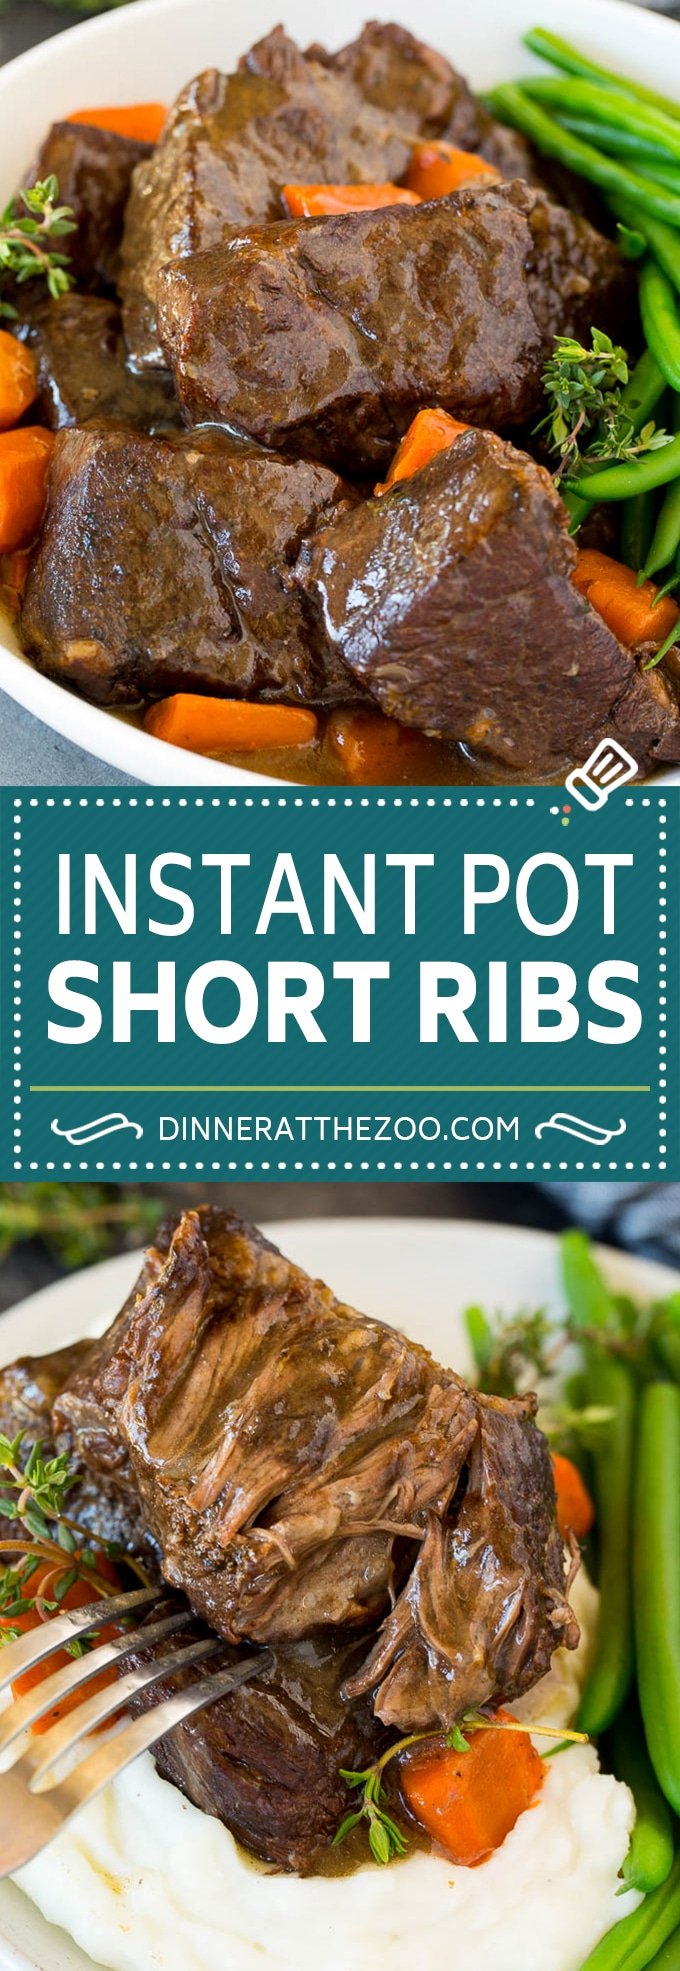 These Instant Pot short ribs are flavorful beef ribs cooked with vegetables and seasonings until tender.